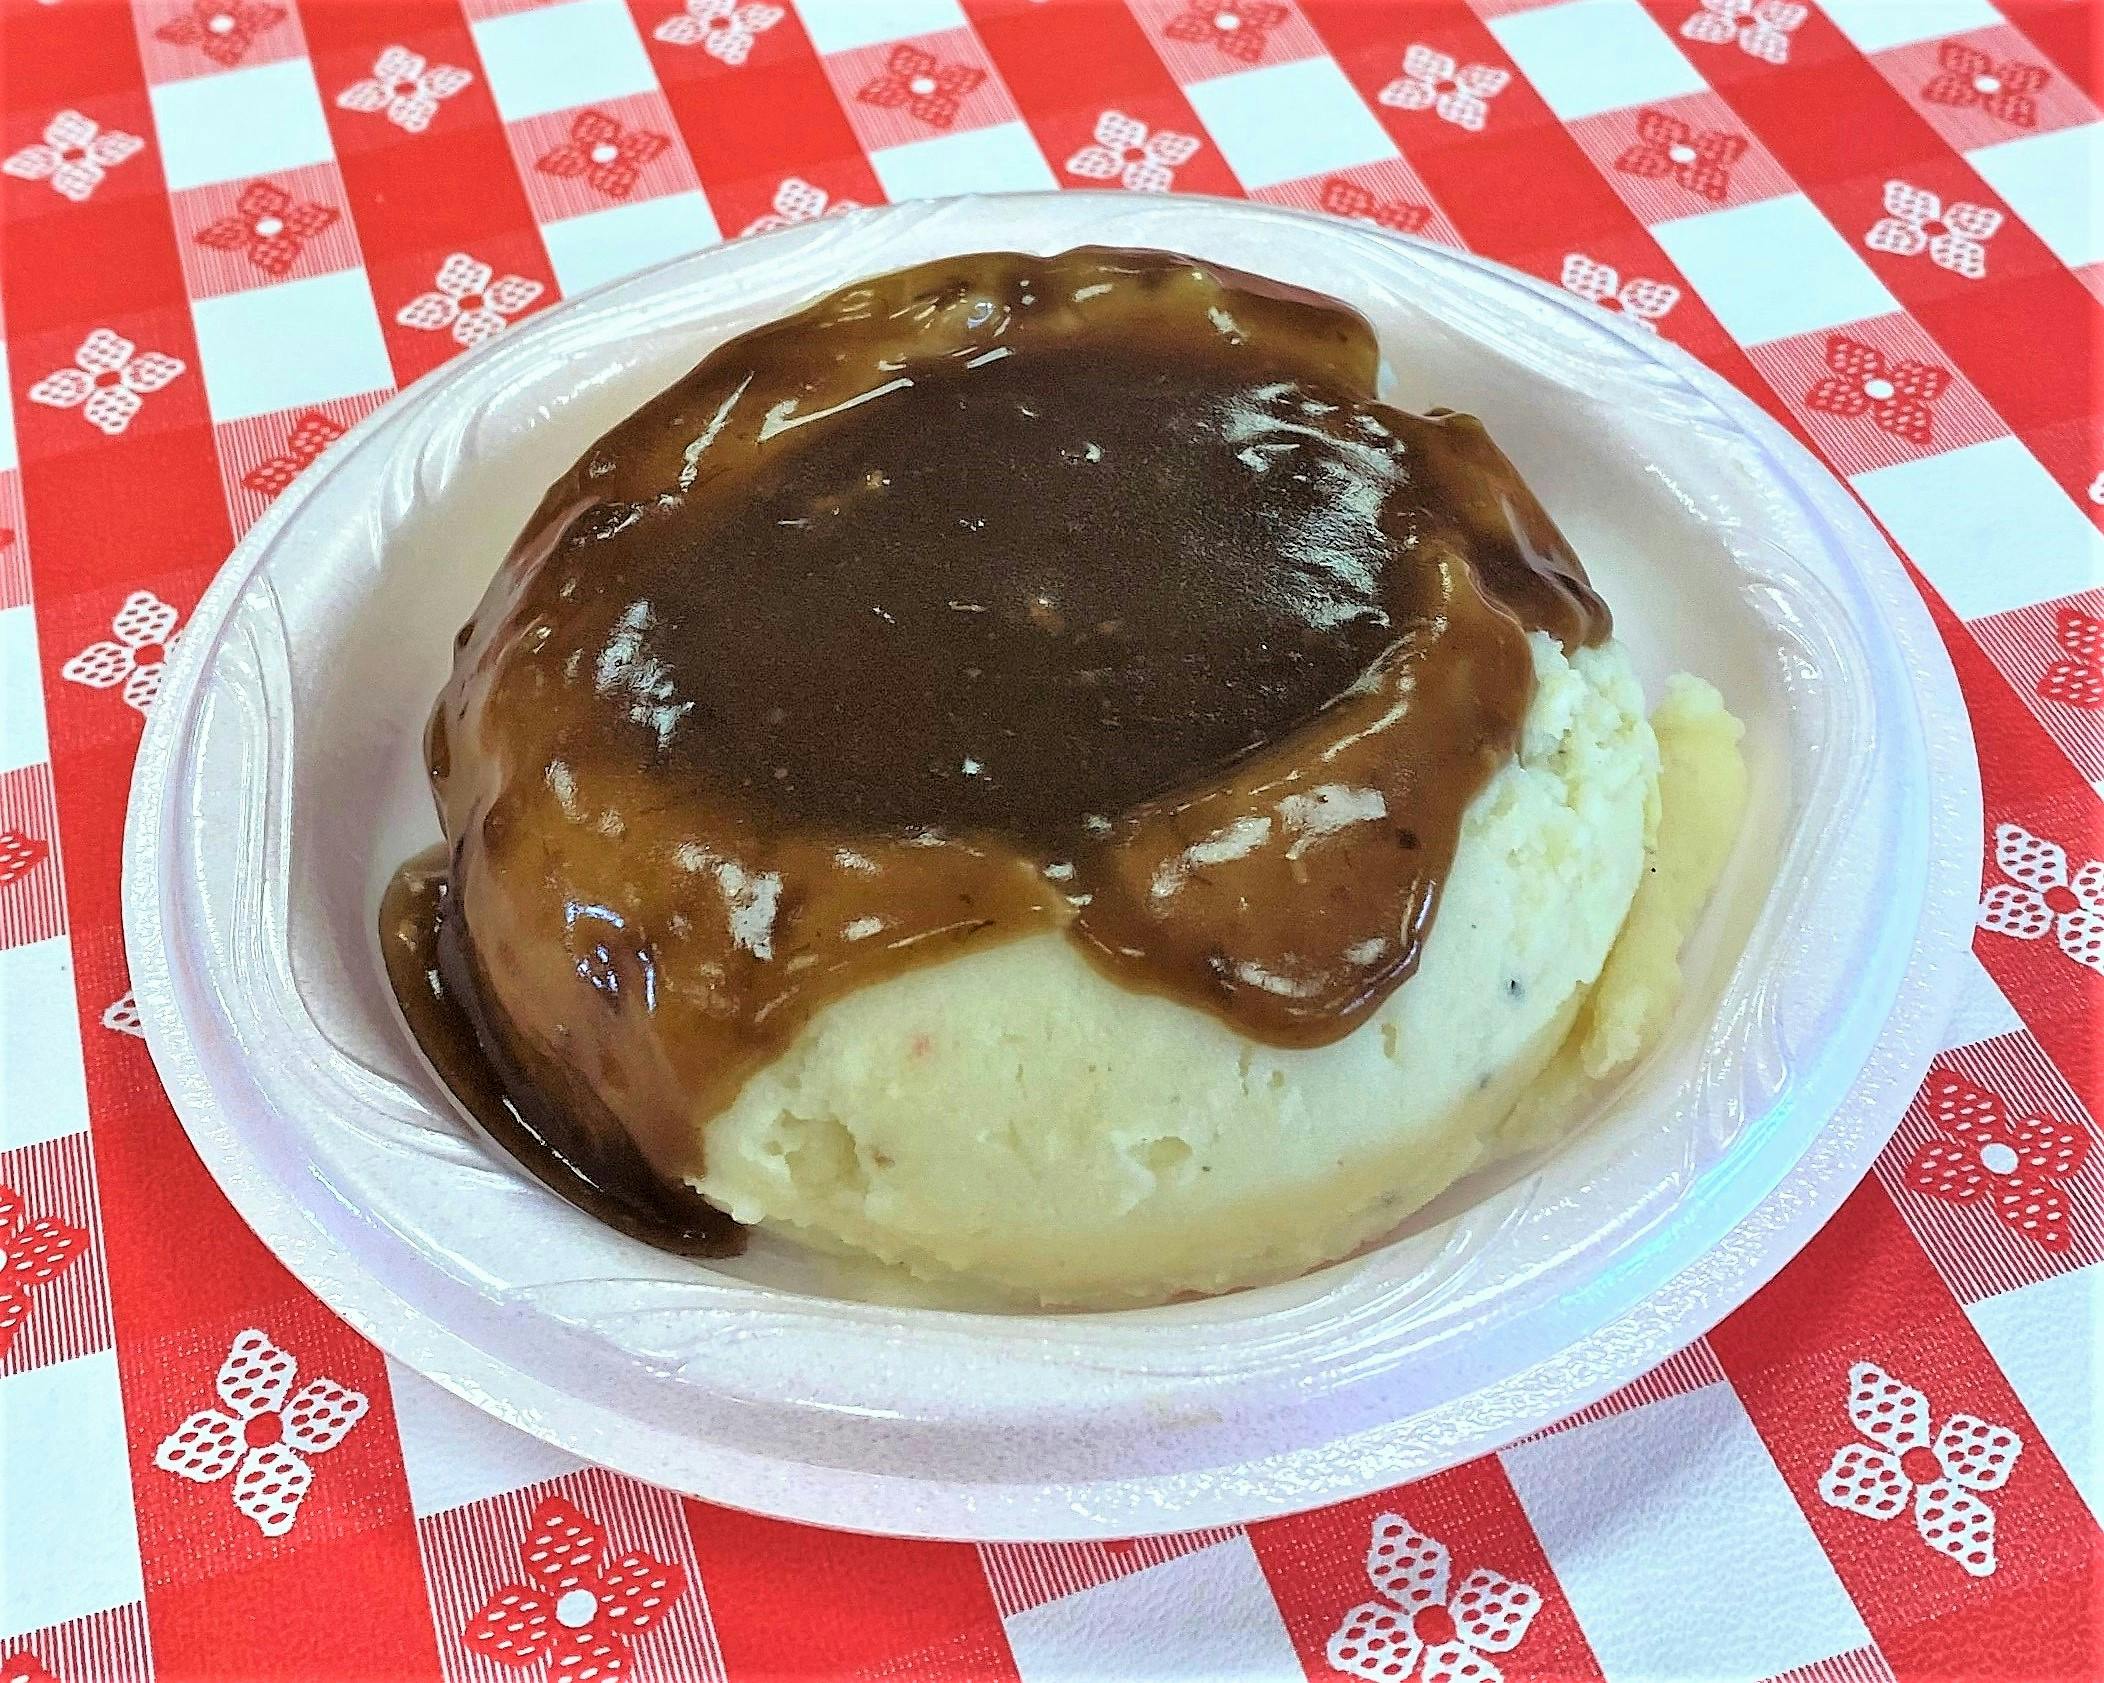 Mashed Potatoes & Gravy from Hog Wild Pit BBQ & Catering in Lawrence, KS